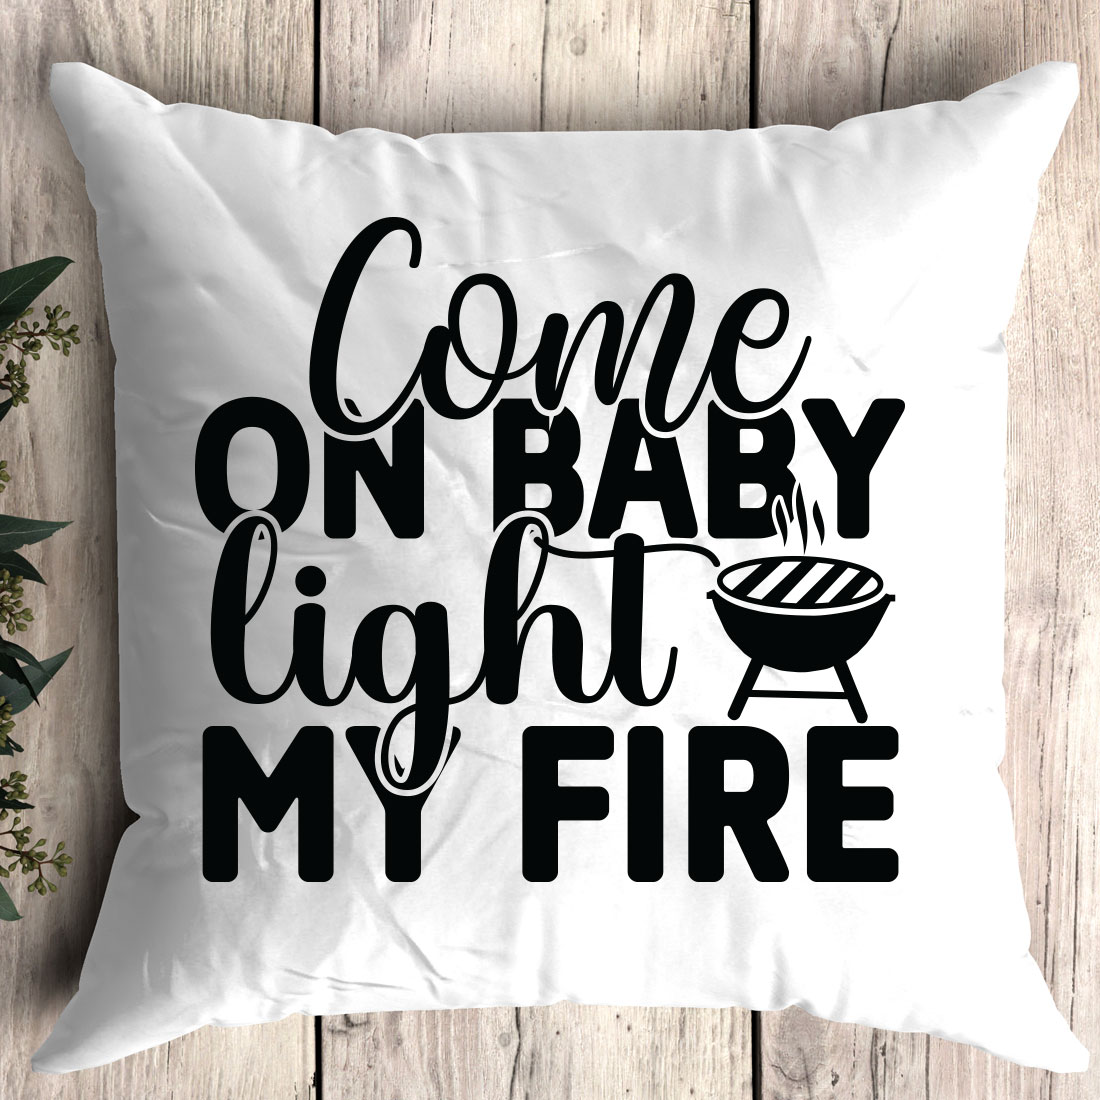 Pillow that says come on baby light my fire.